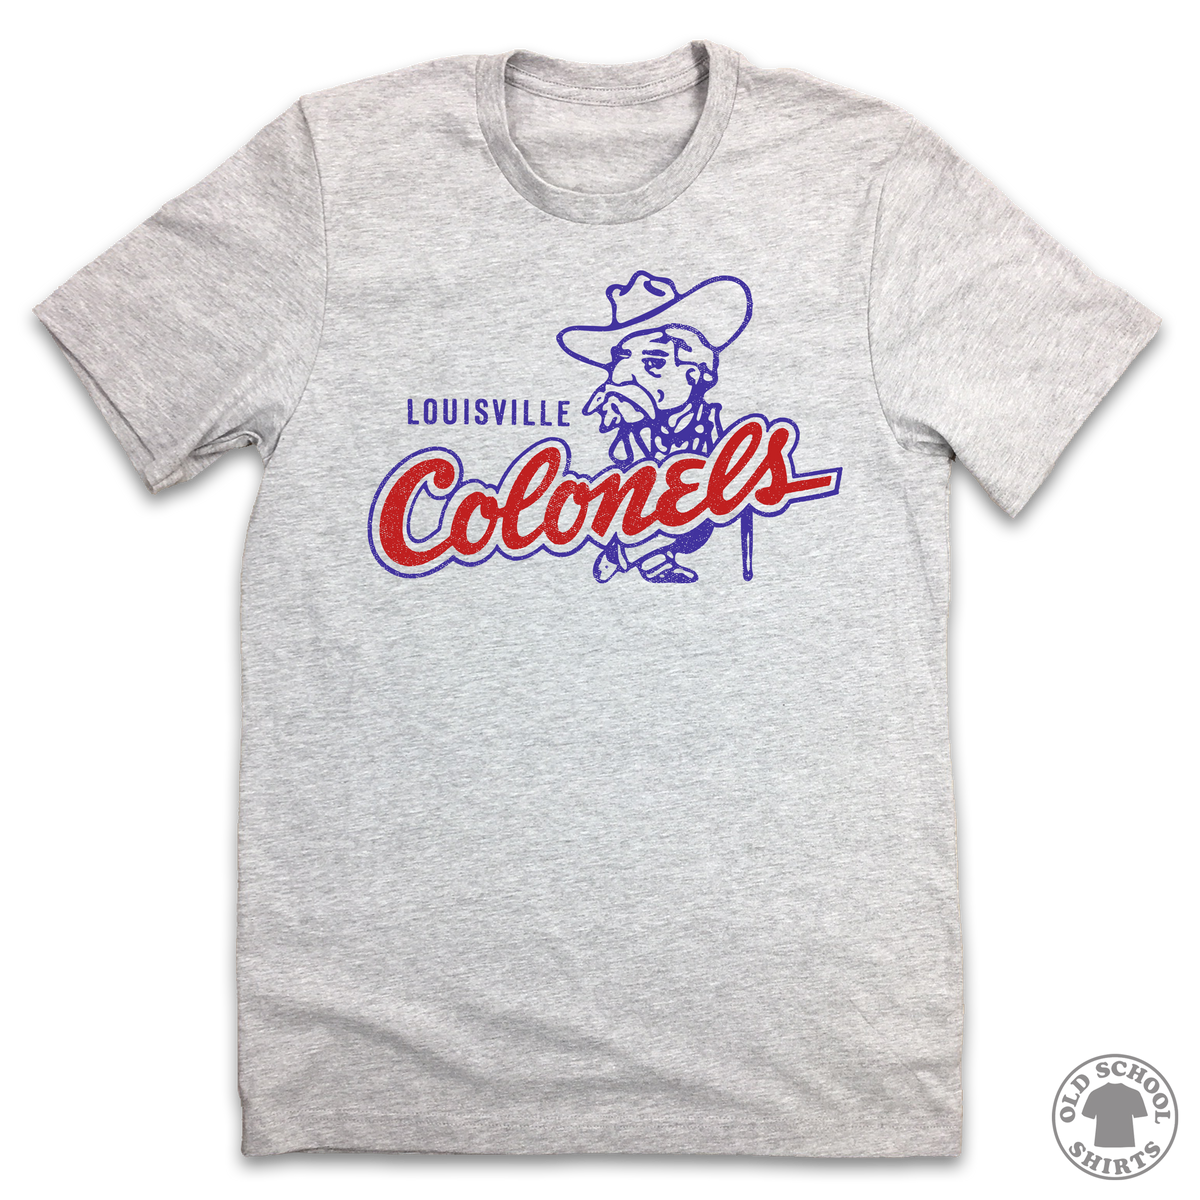 Louisville Colonels - Old School Shirts- Retro Sports T Shirts